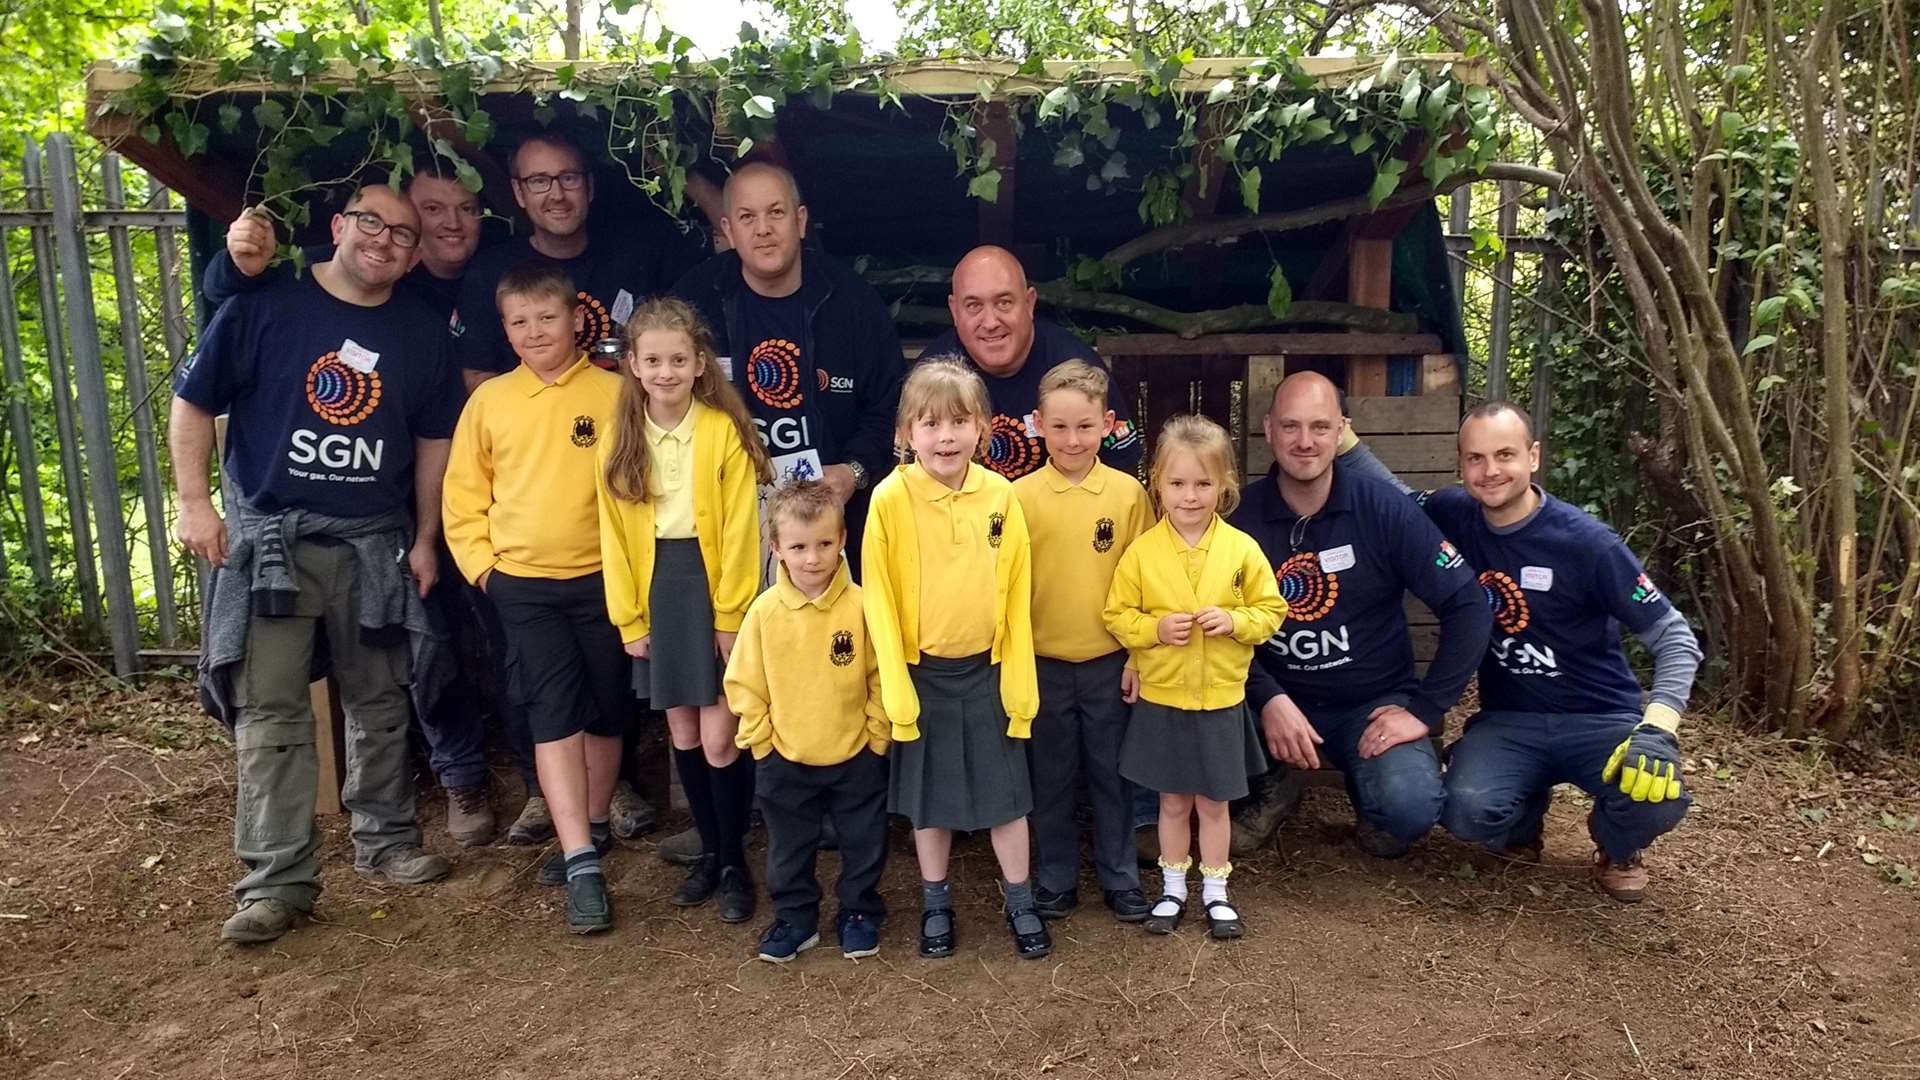 The SGN team show some of the High Firs pupils the shelter in their new outdoor classroom.